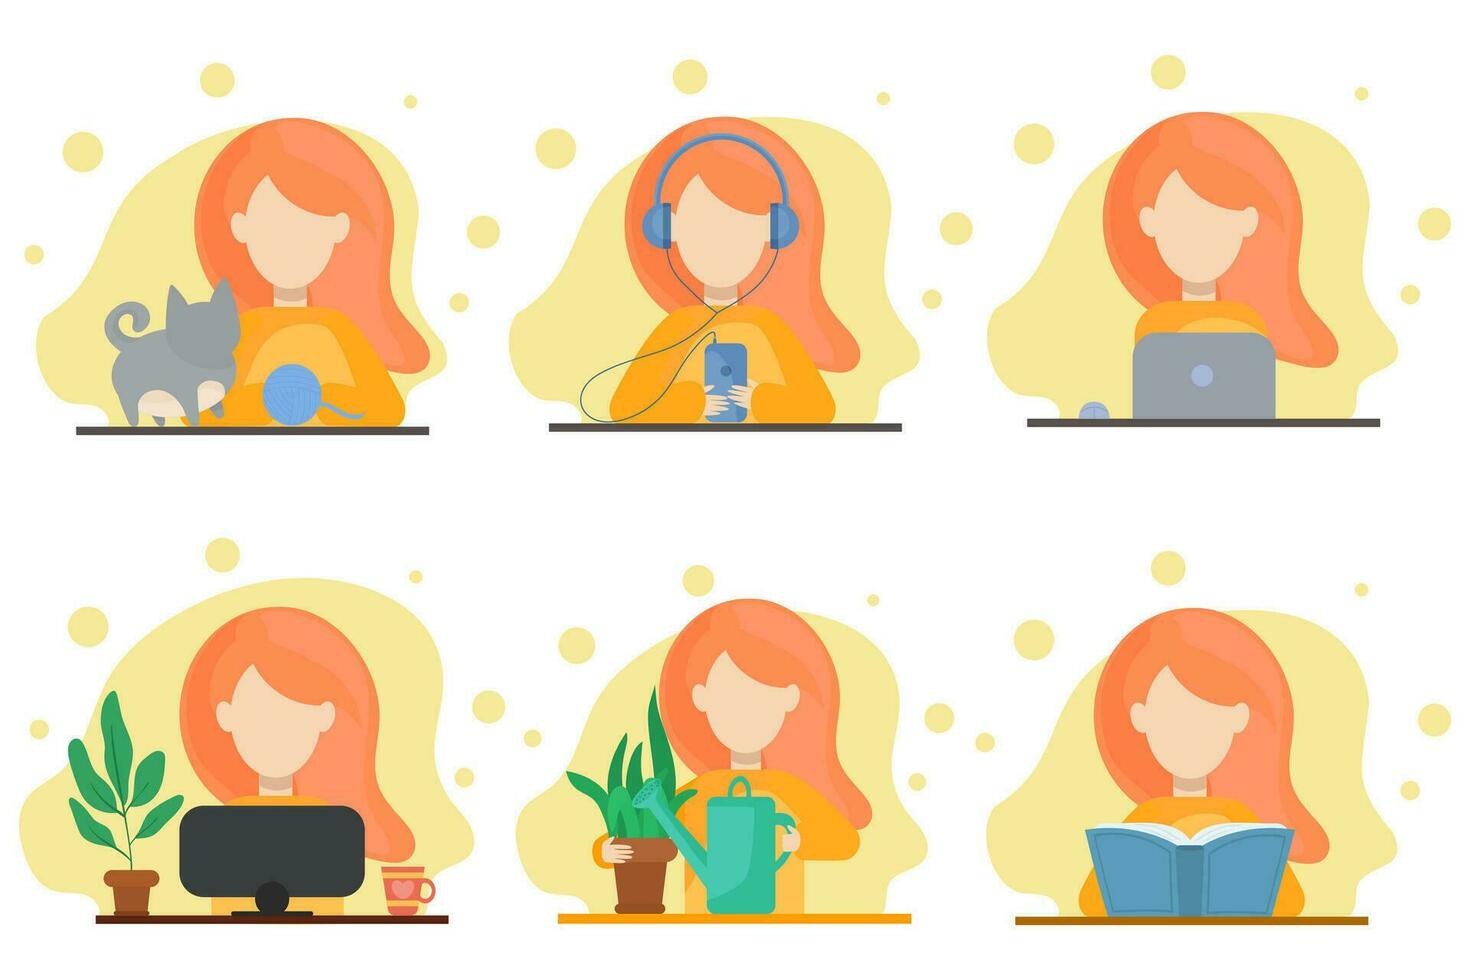 Icons of students, girls playing with a cat, listen to music through headphones, water flowers, reading book. A set of women's girlish icons working at a table in the style of a flat. vector